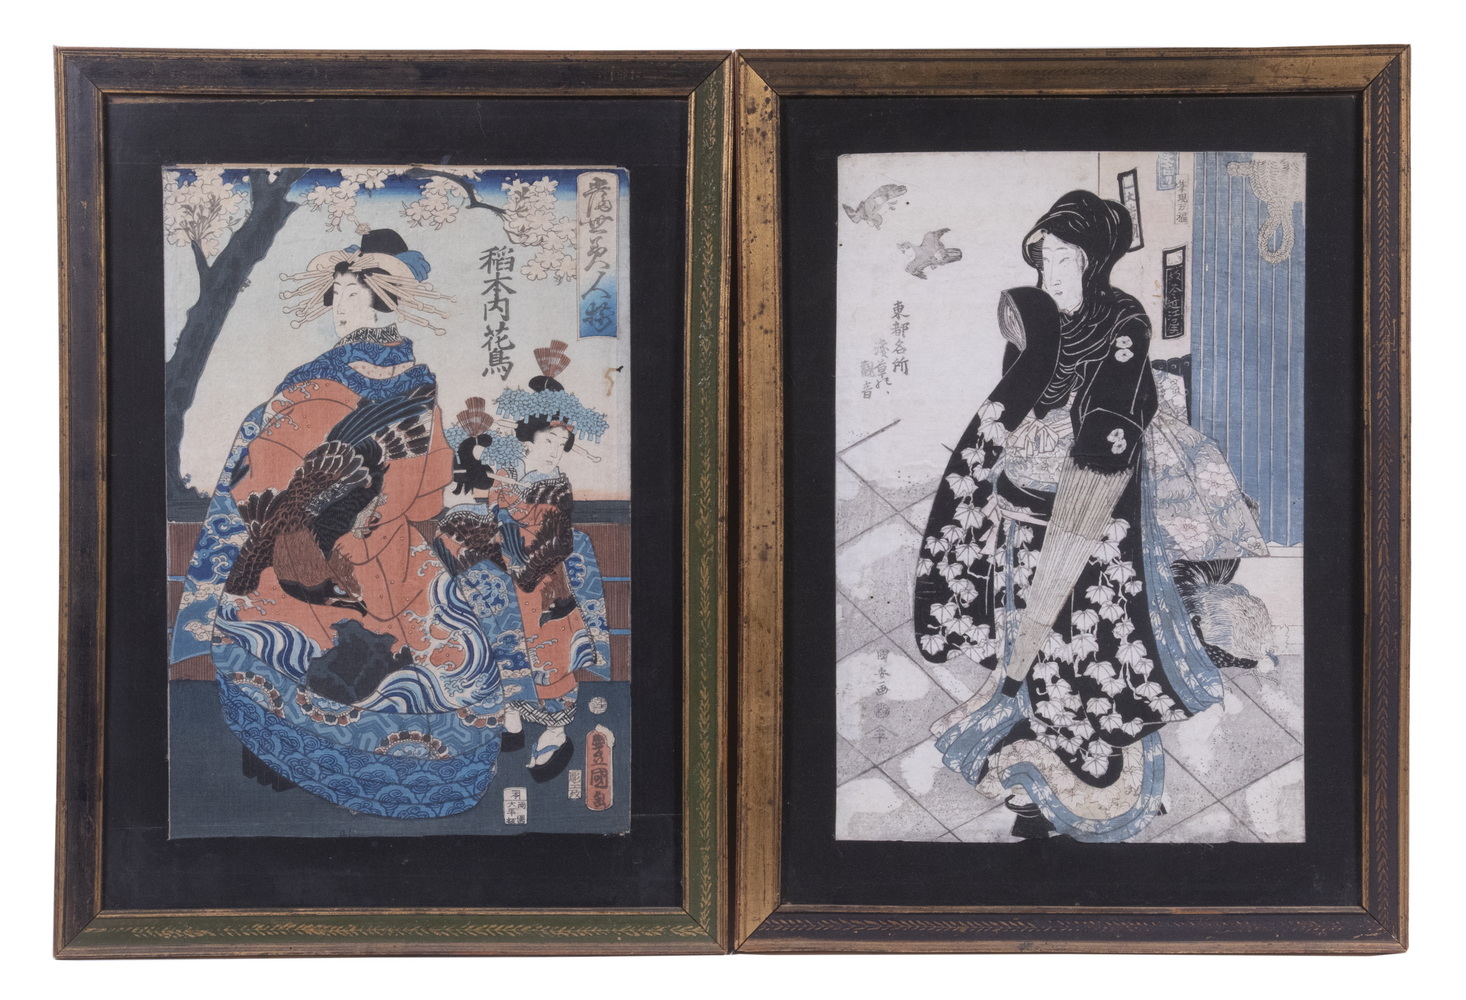  2 JAPANESE WOODBLOCK PRINTS BY 33d6c7